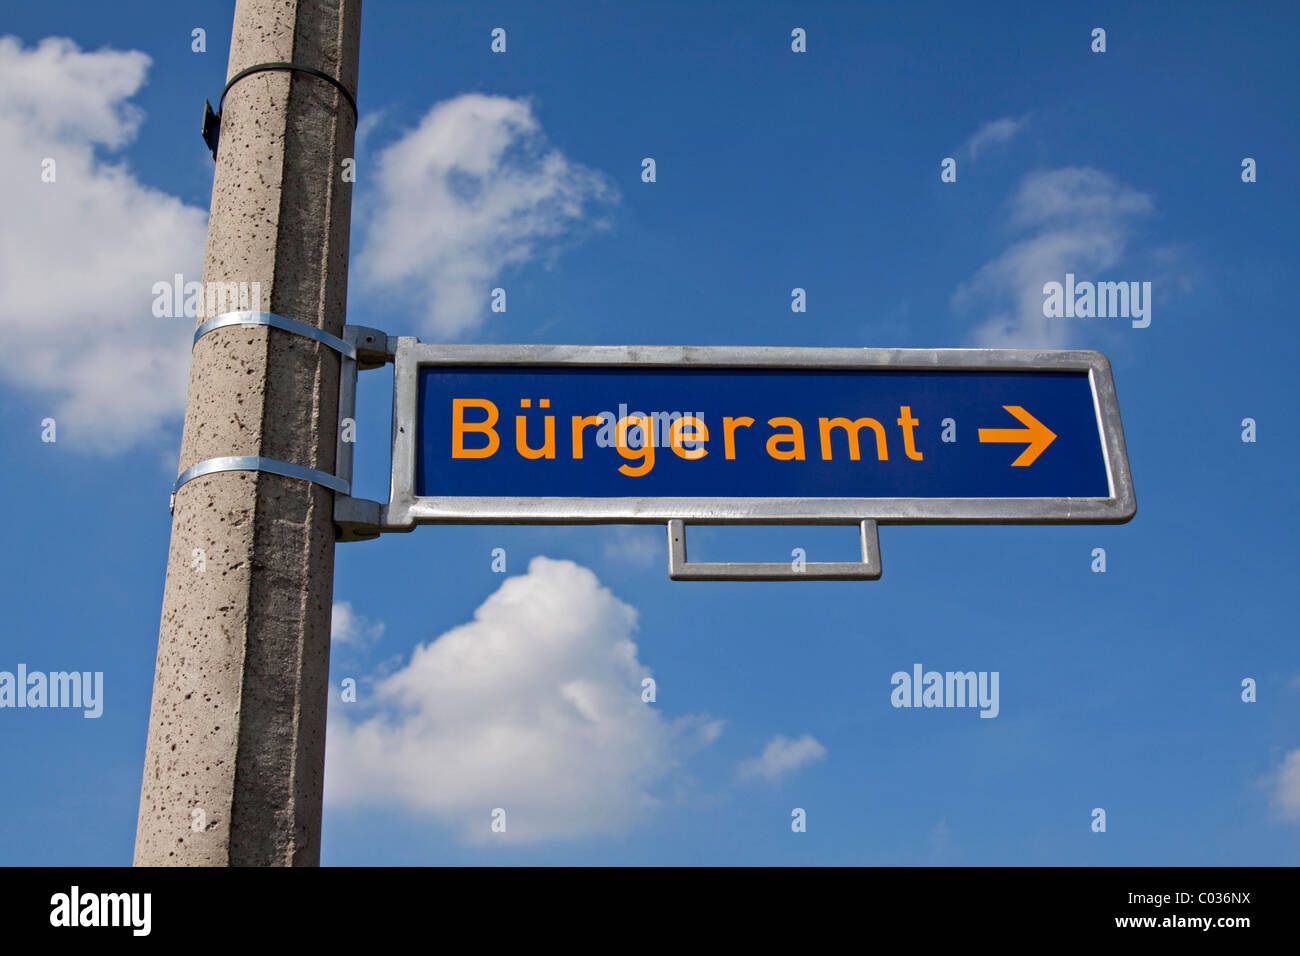 Sign, Buergeramt, German for public service offices, with a directional arrow to the right Stock Photo